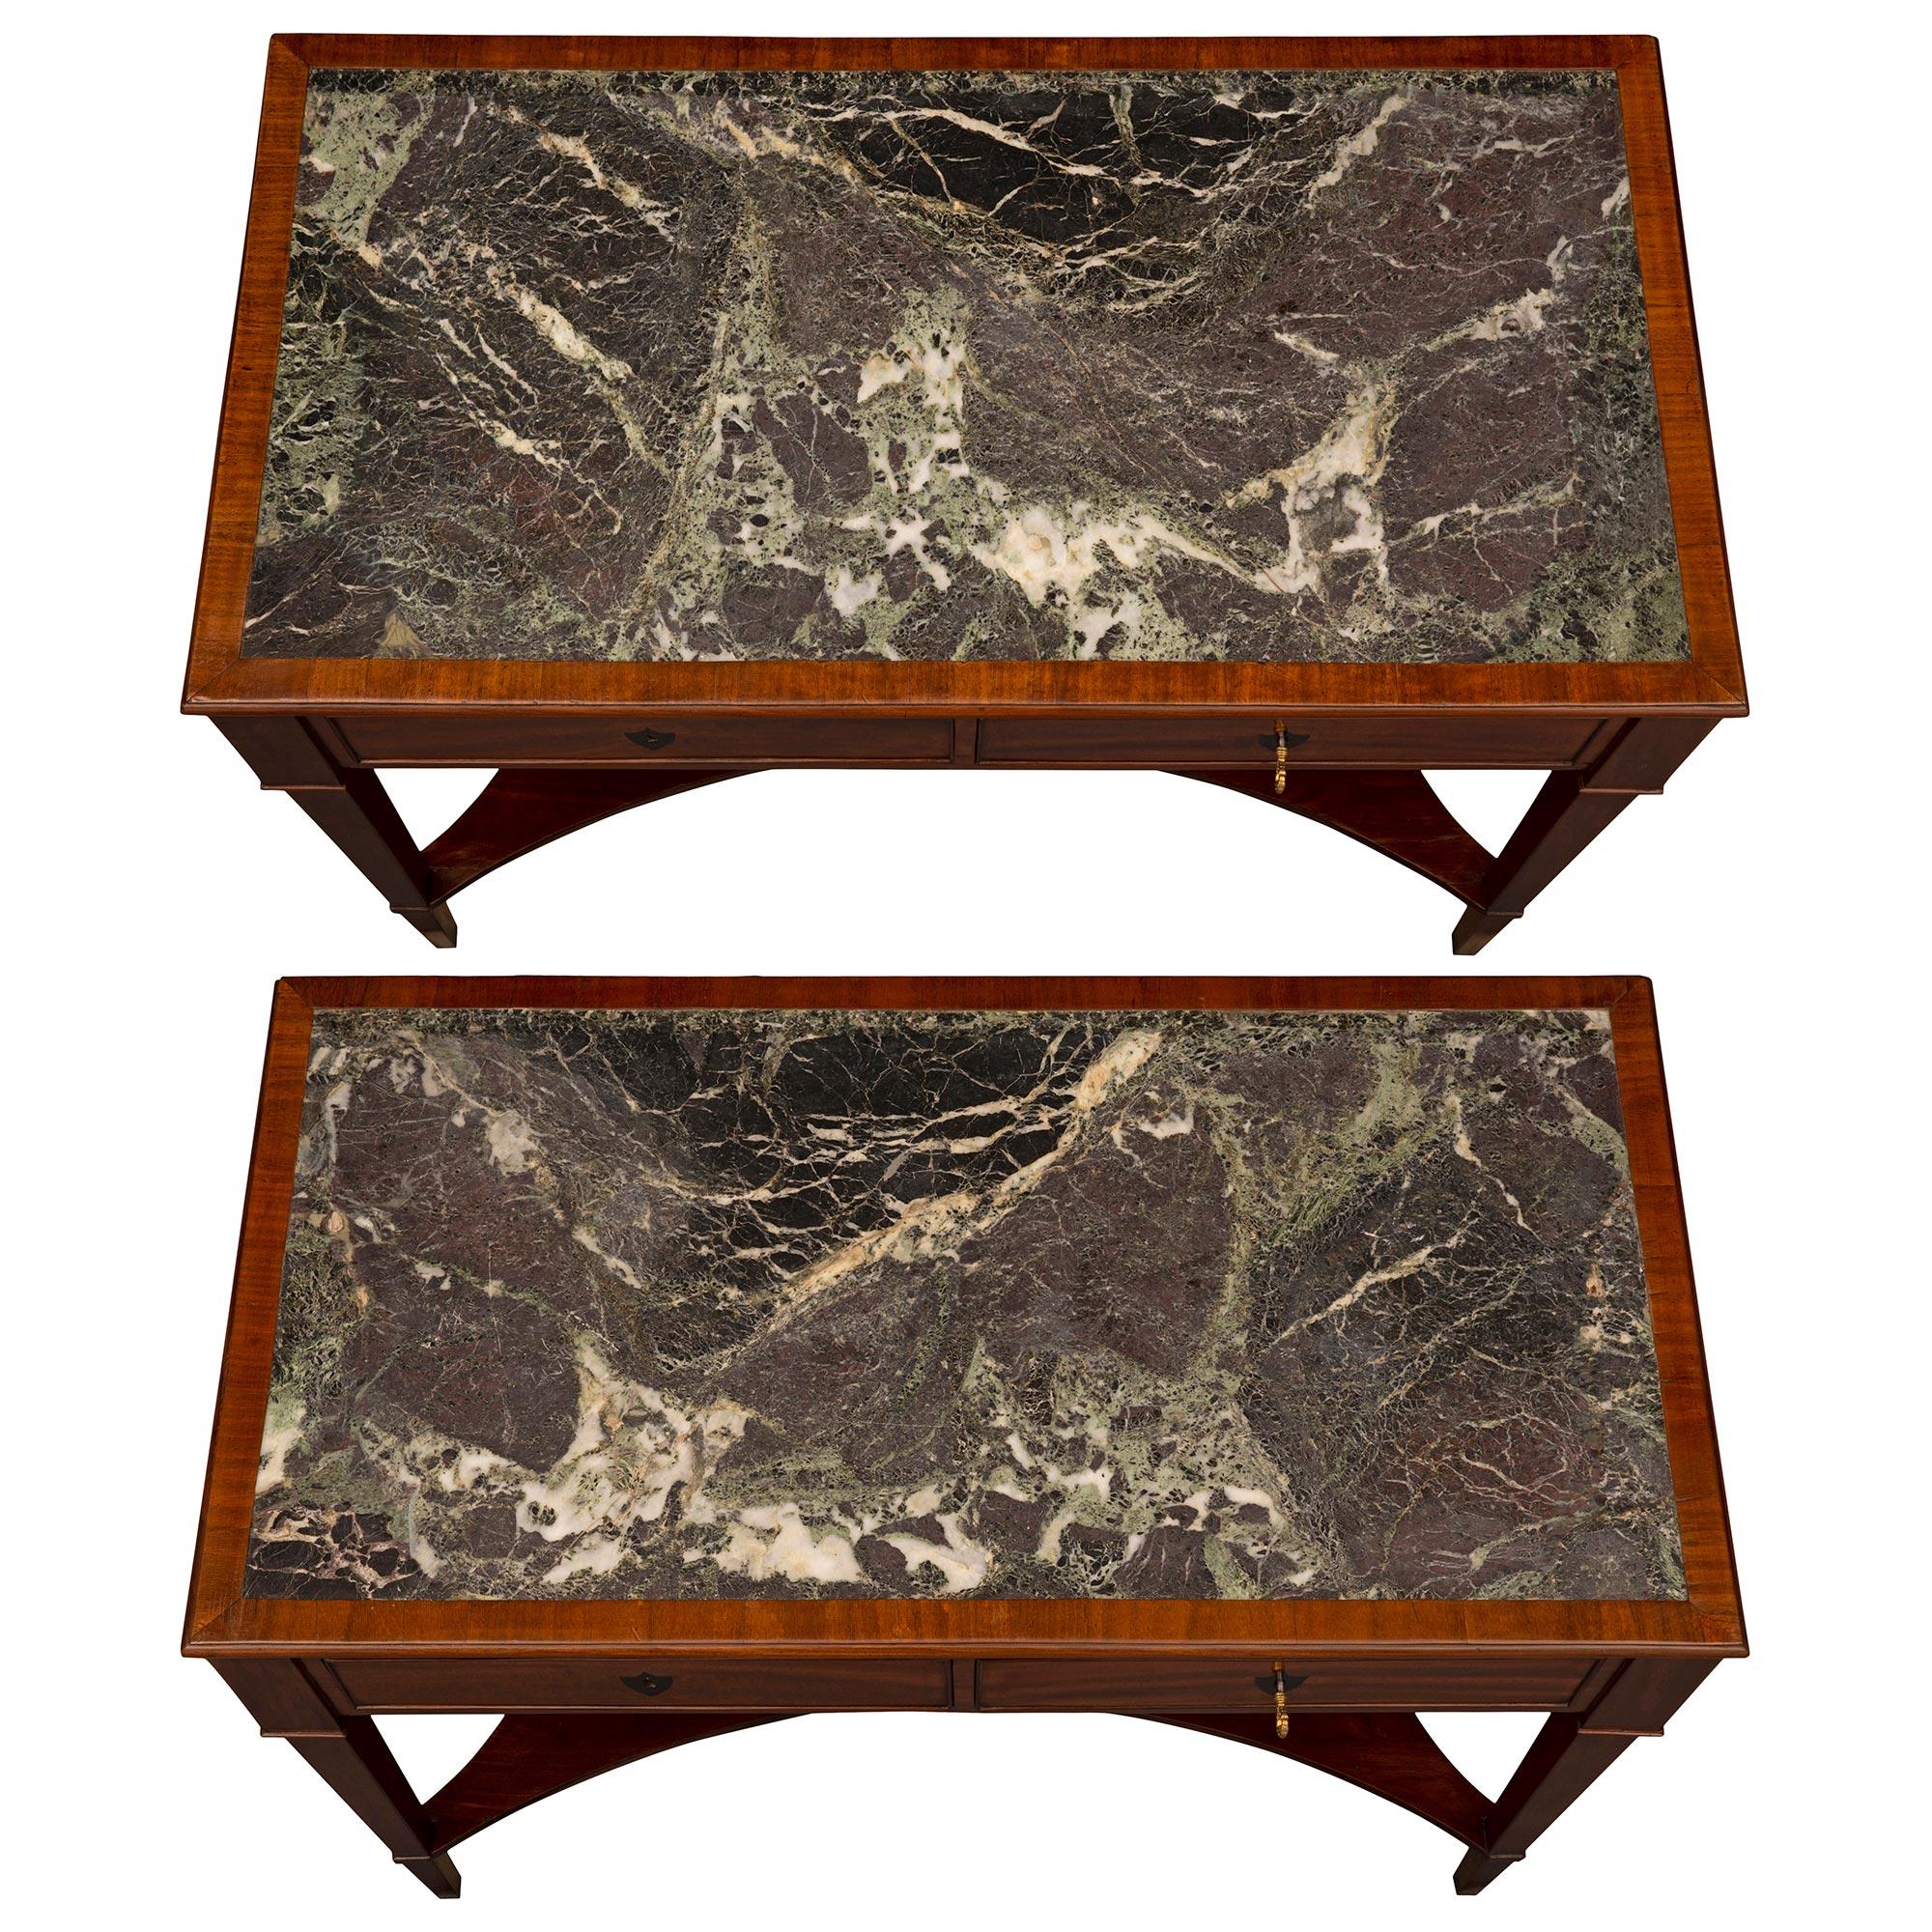 A very elegant pair of French 19th century Directoire st. Mahogany, ebonized Fruitwood, and Vert Maurin marble consoles. Each freestanding console is raised by slender square tapered legs joined by a fine bottom shelf with most decorative concave